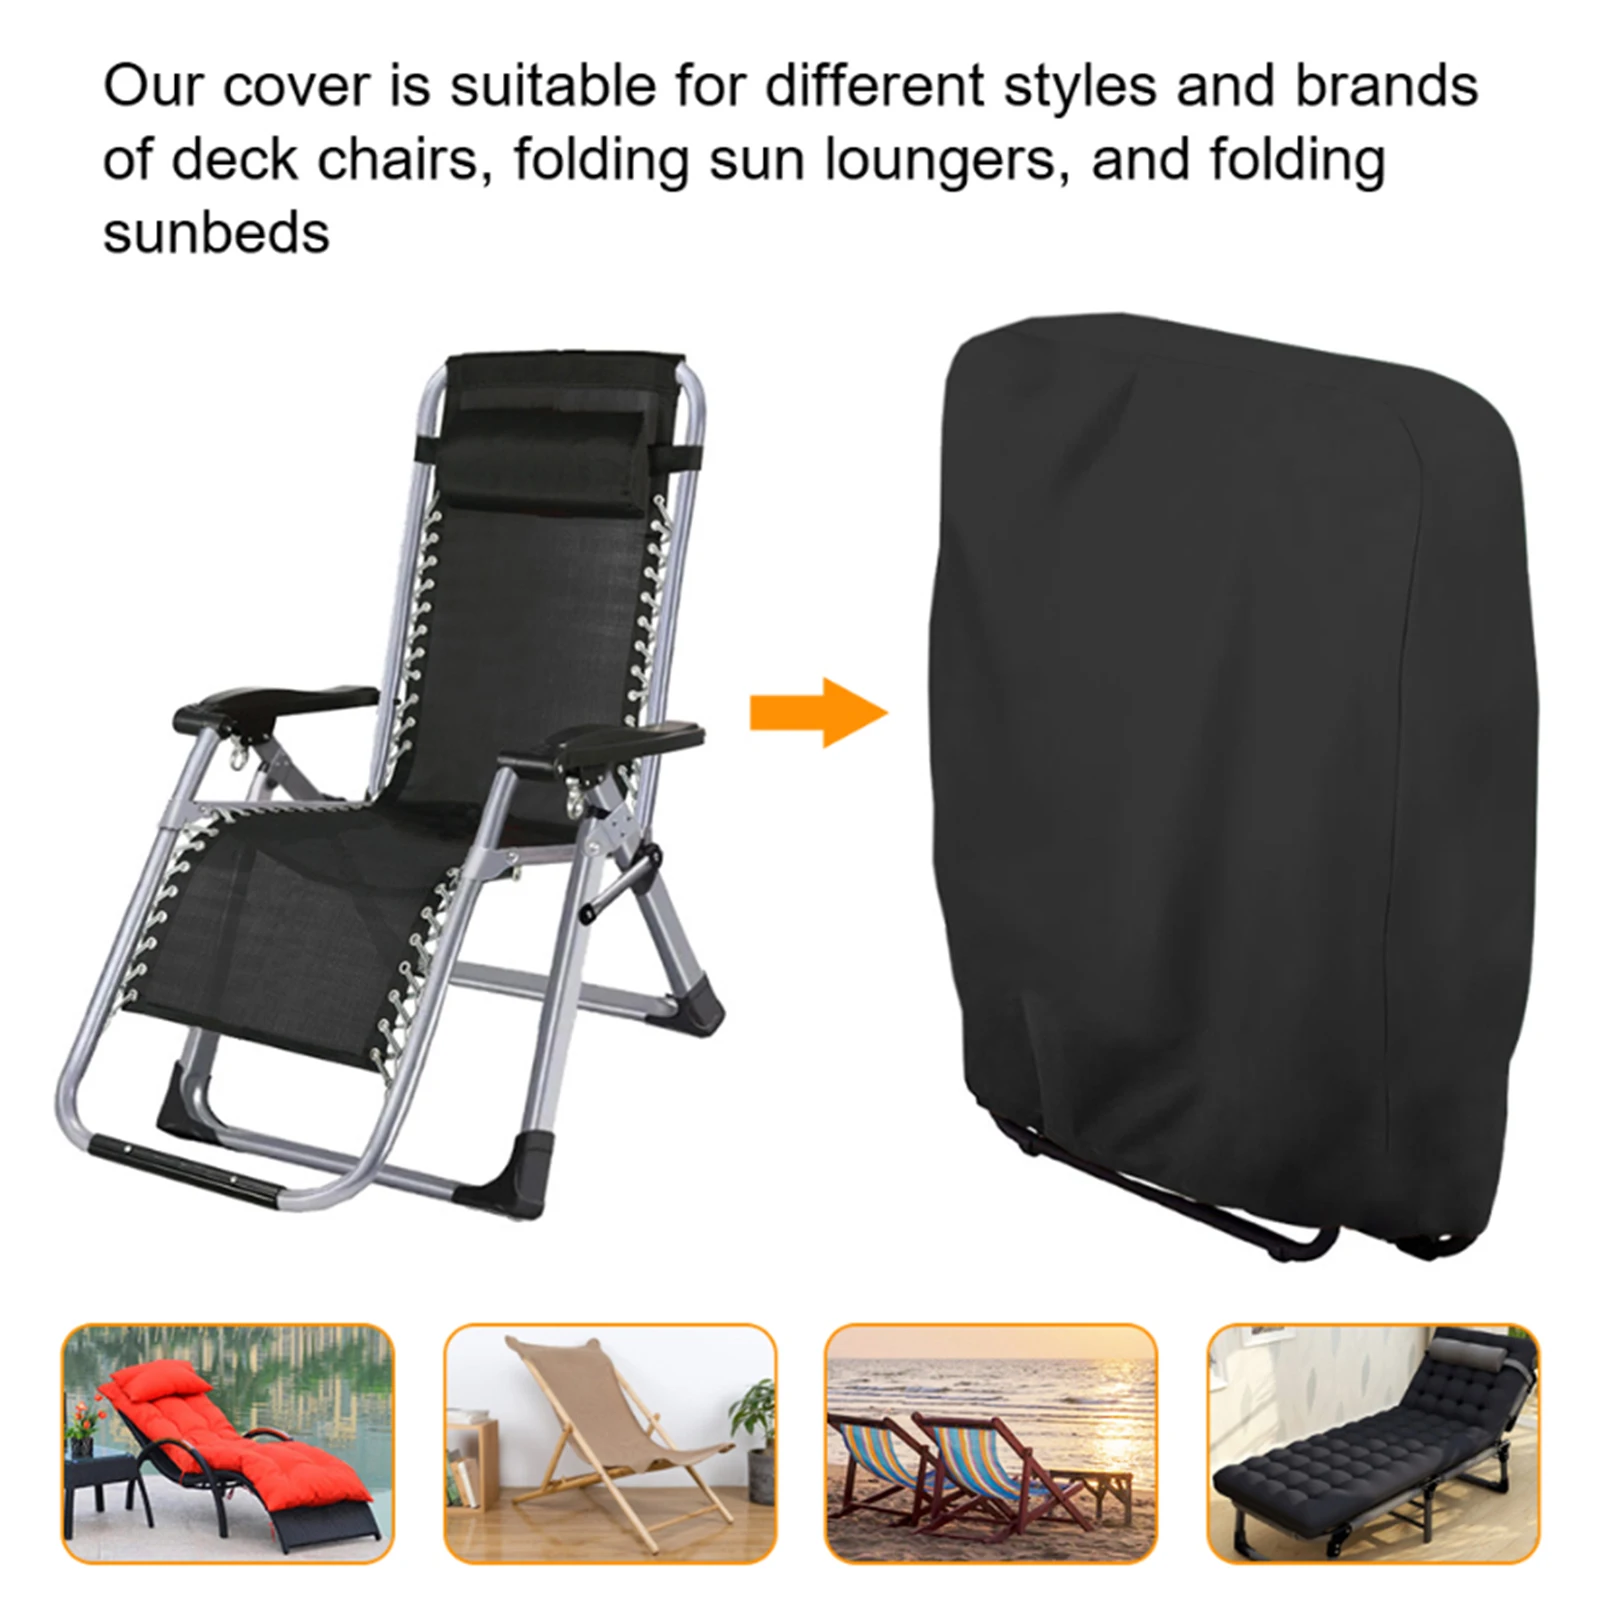 Folding Chair Cover Stacking Patio Chair Cover Oxford Fabric Waterproof Protective Cover Patio Outdoor Veranda